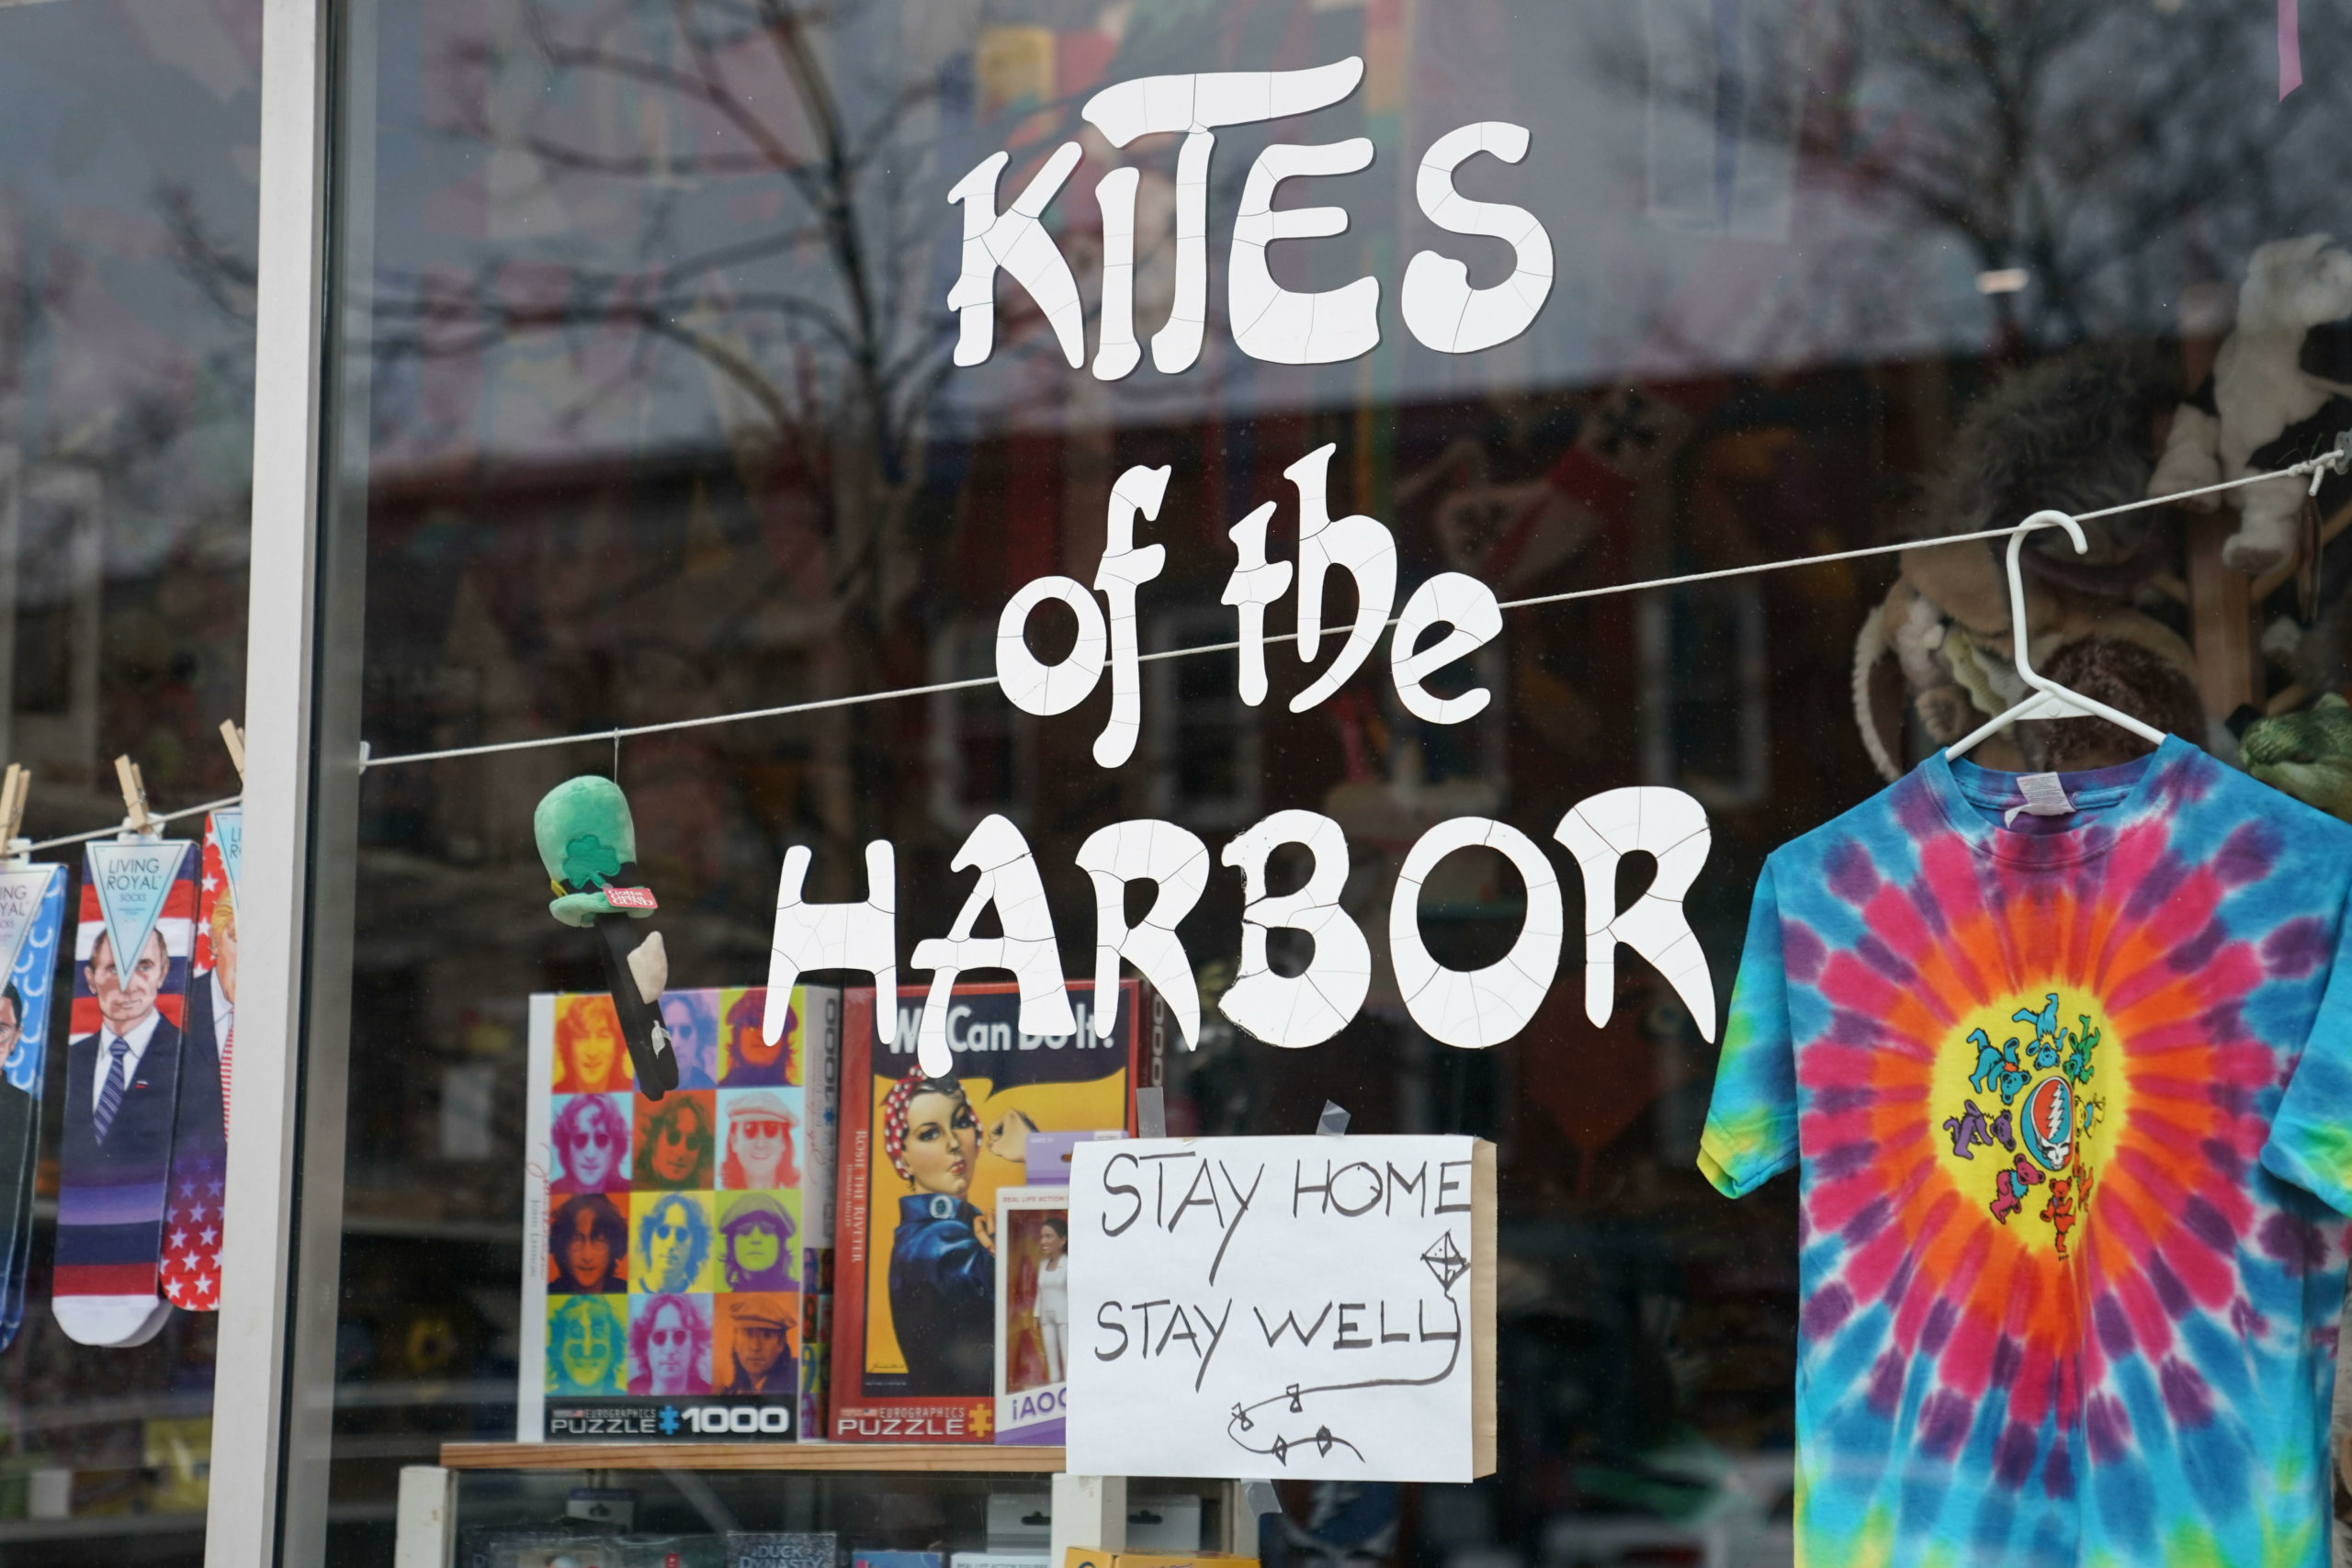 Sag Harbor's iconic Main Street store, Kites of the Harbor, encourgaed safety this week.